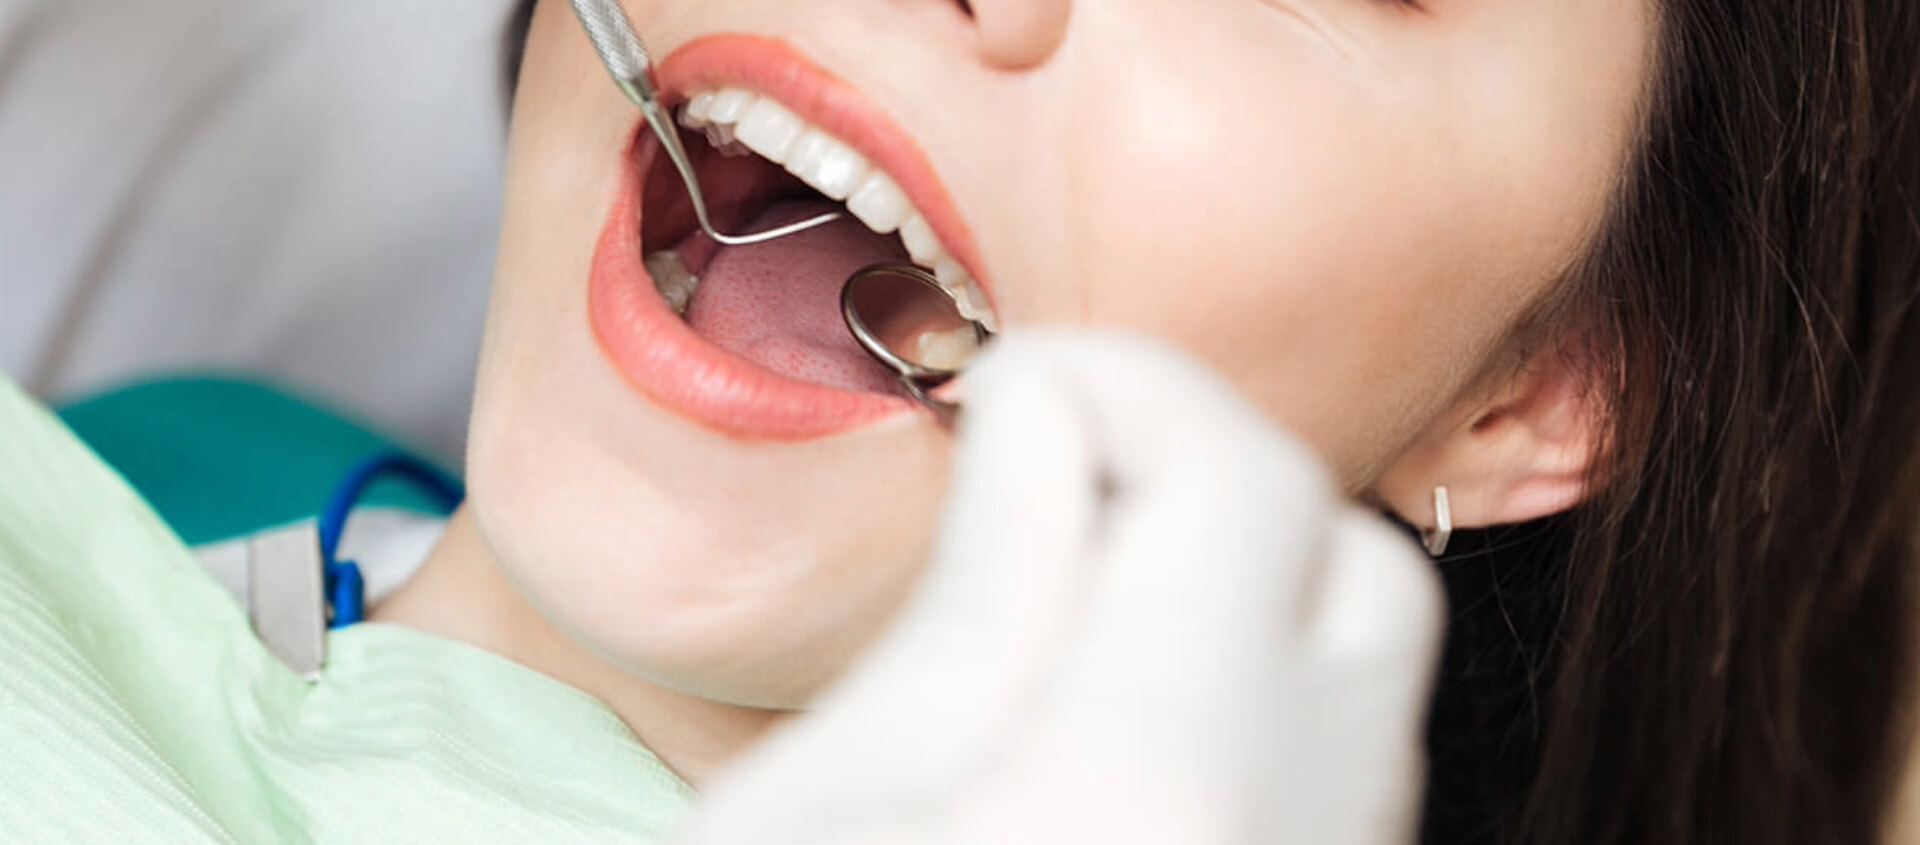 Removing Plaque From Teeth in Muncie IN area